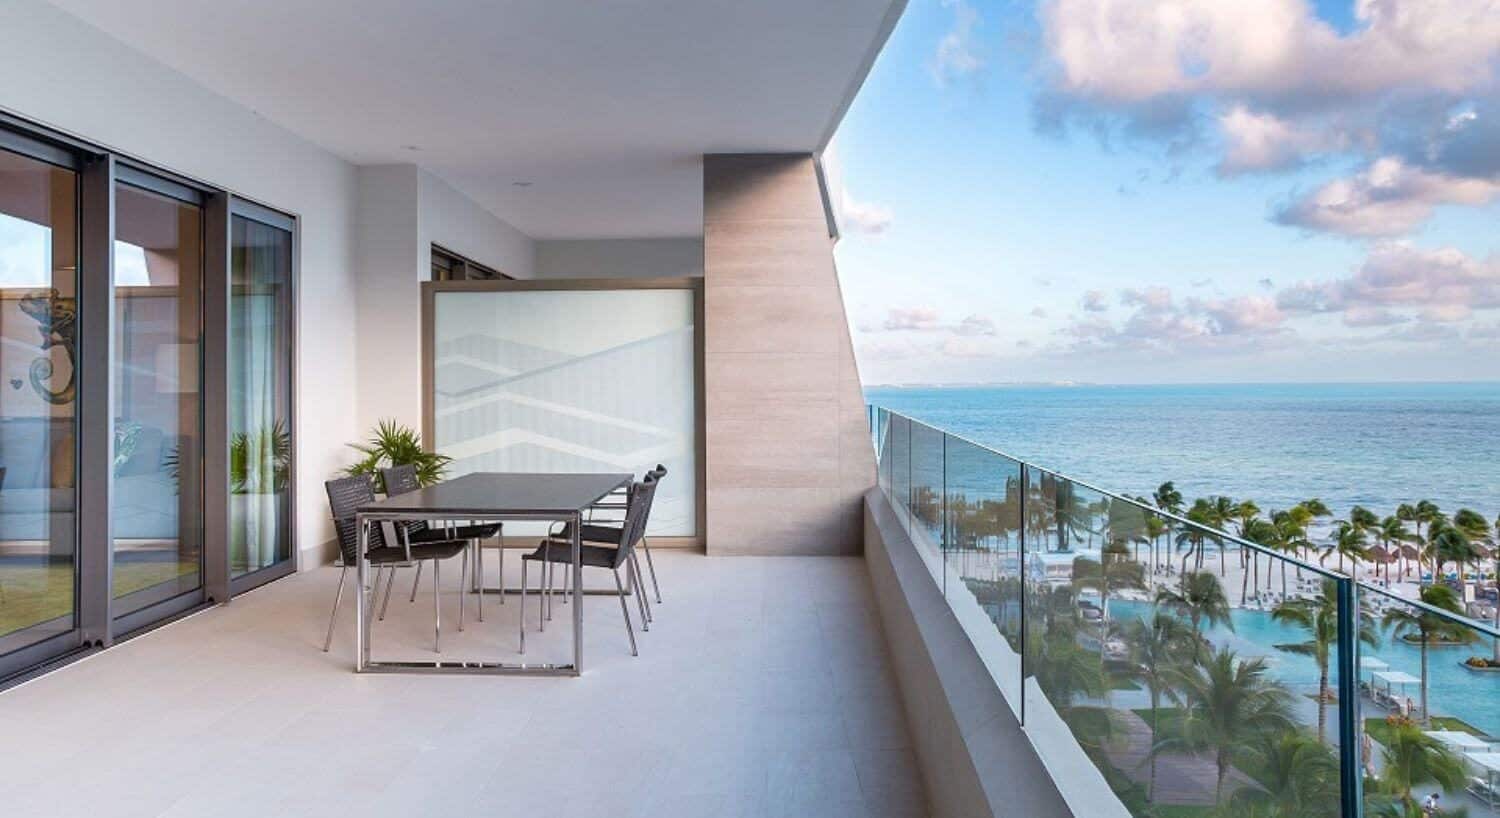 A private balcony with a dining table and chairs, sliding doors into a living room, and views of the resort pools, palm trees, sandy beach and ocean.